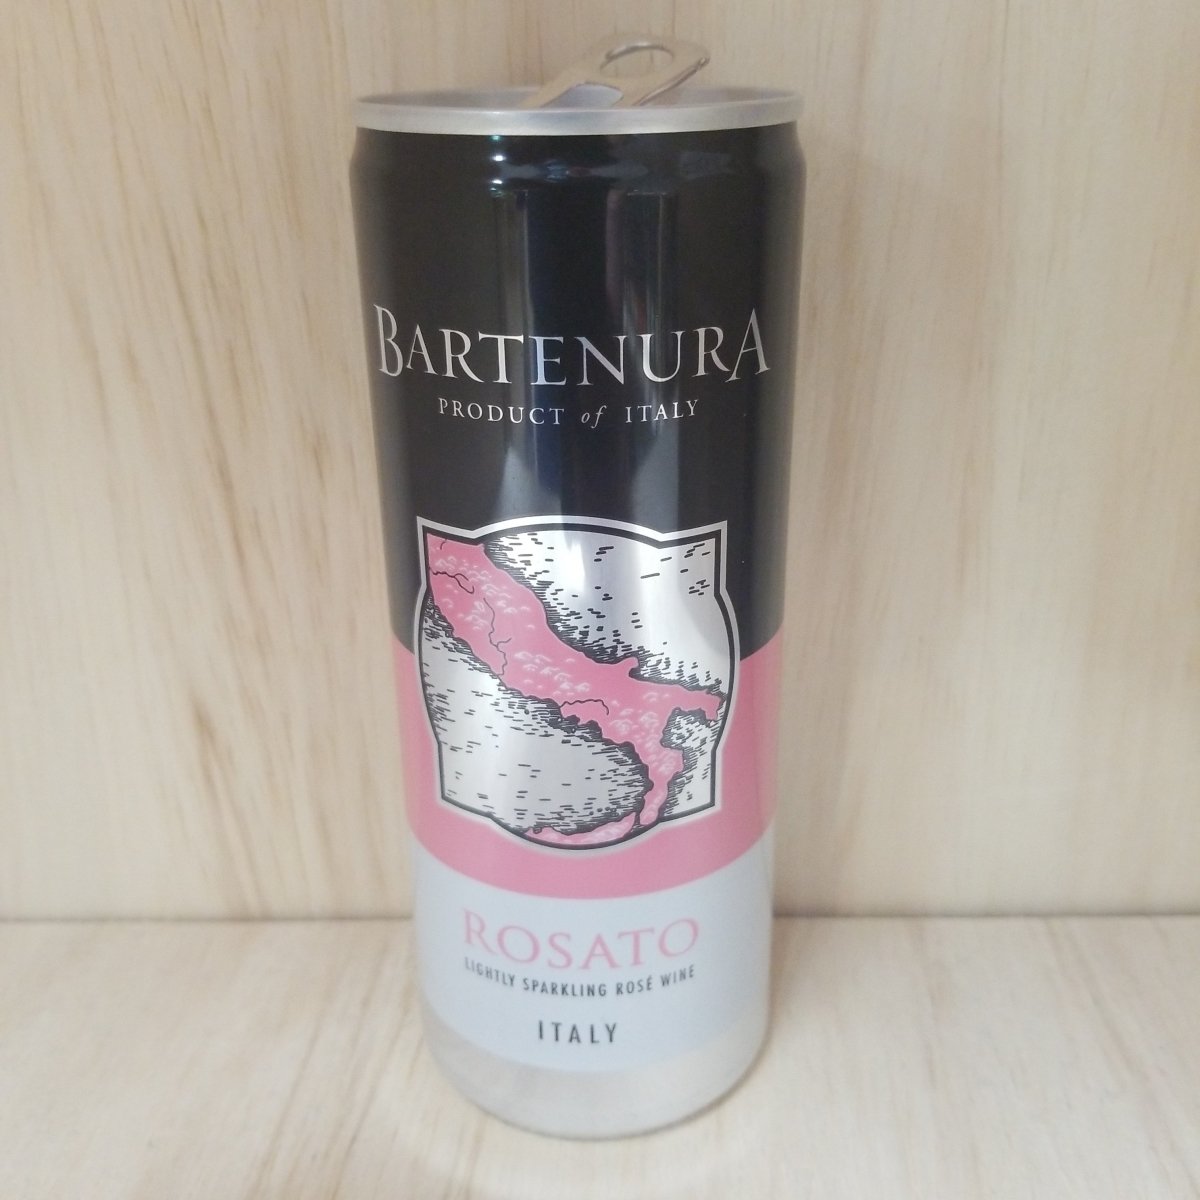 Bartenura Rosato Cans 250ml (Kosher for Passover/Mevushal) - Sip & Say